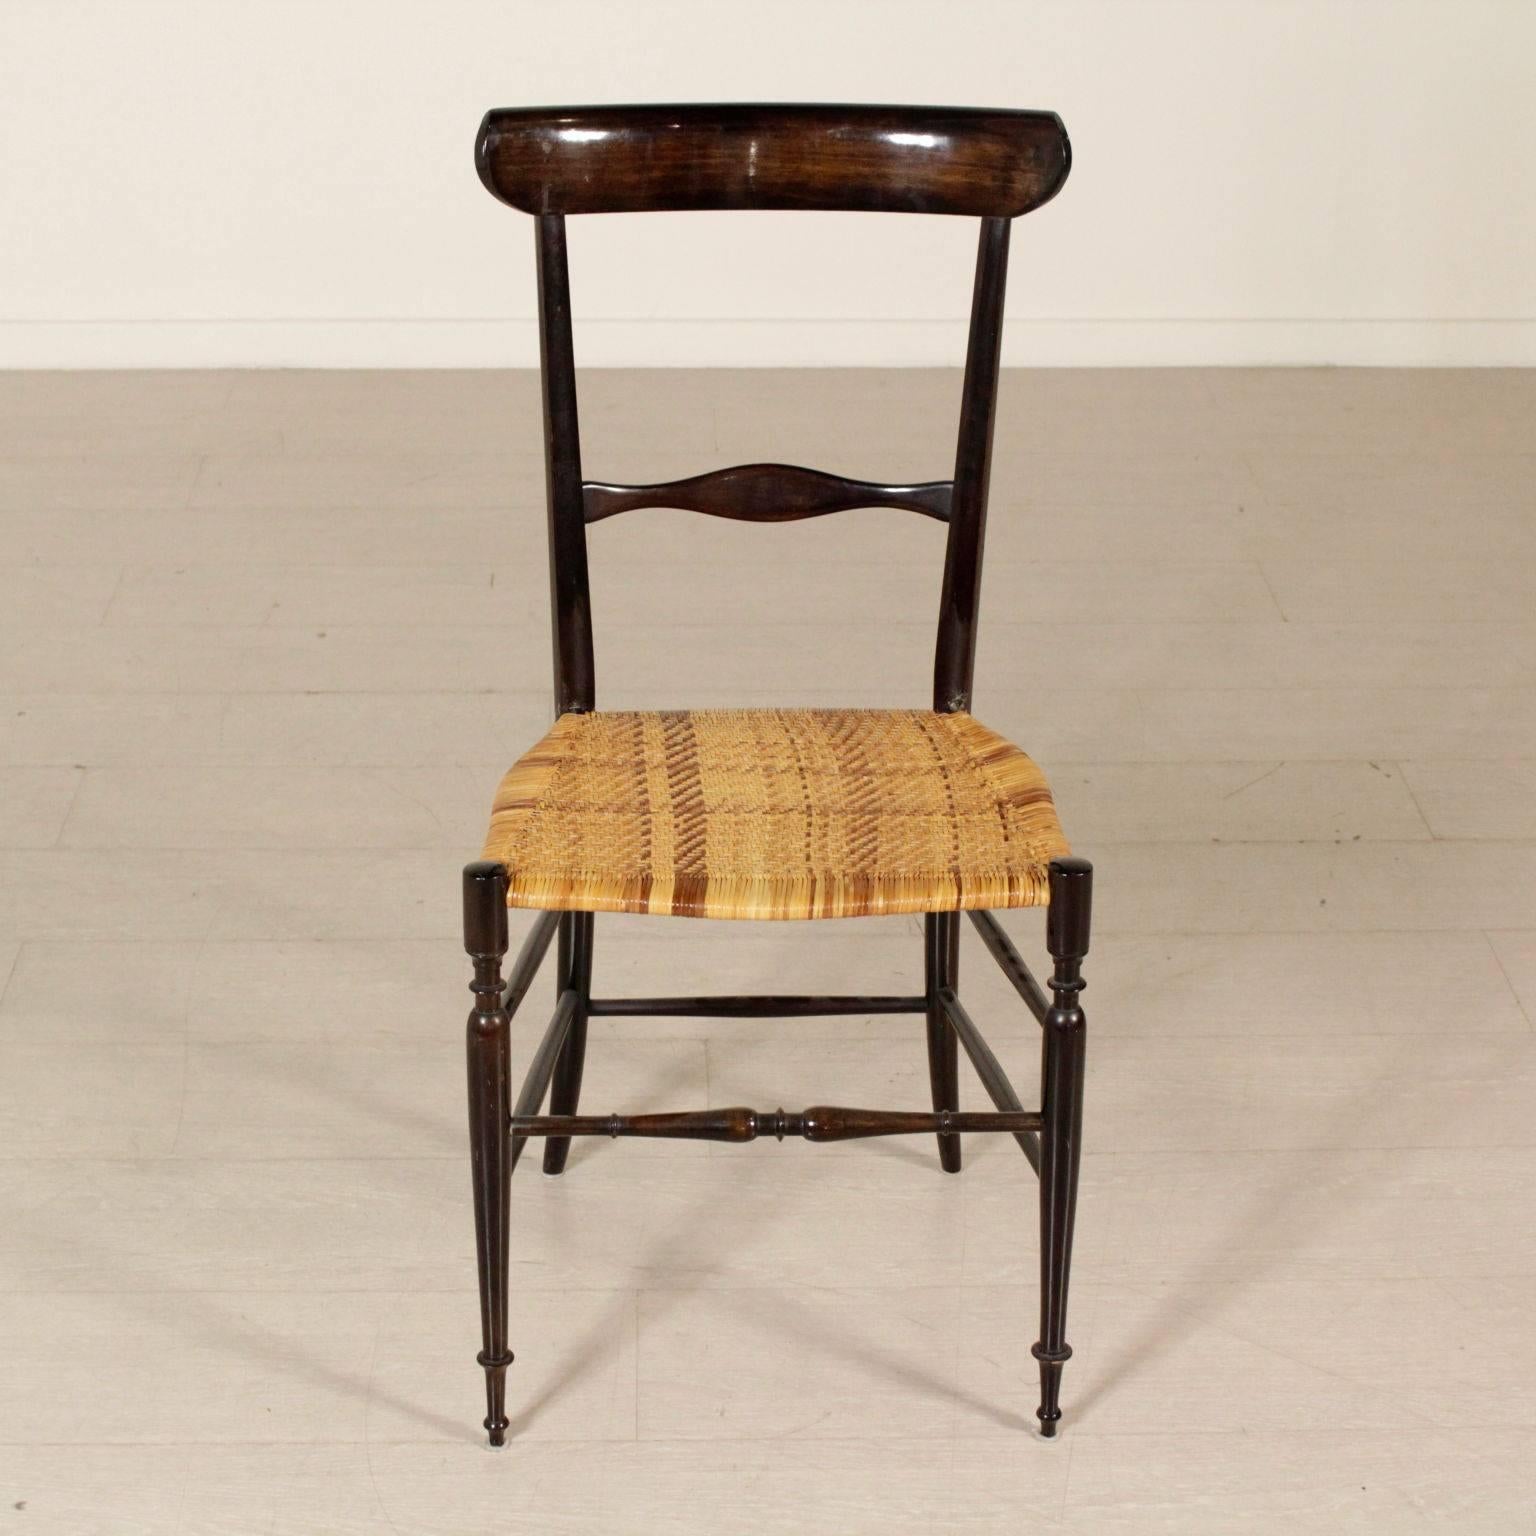 A group of four chairs, lacquered wood, intertwined rattan. Manufactured in Italy, 1950s-1960s.